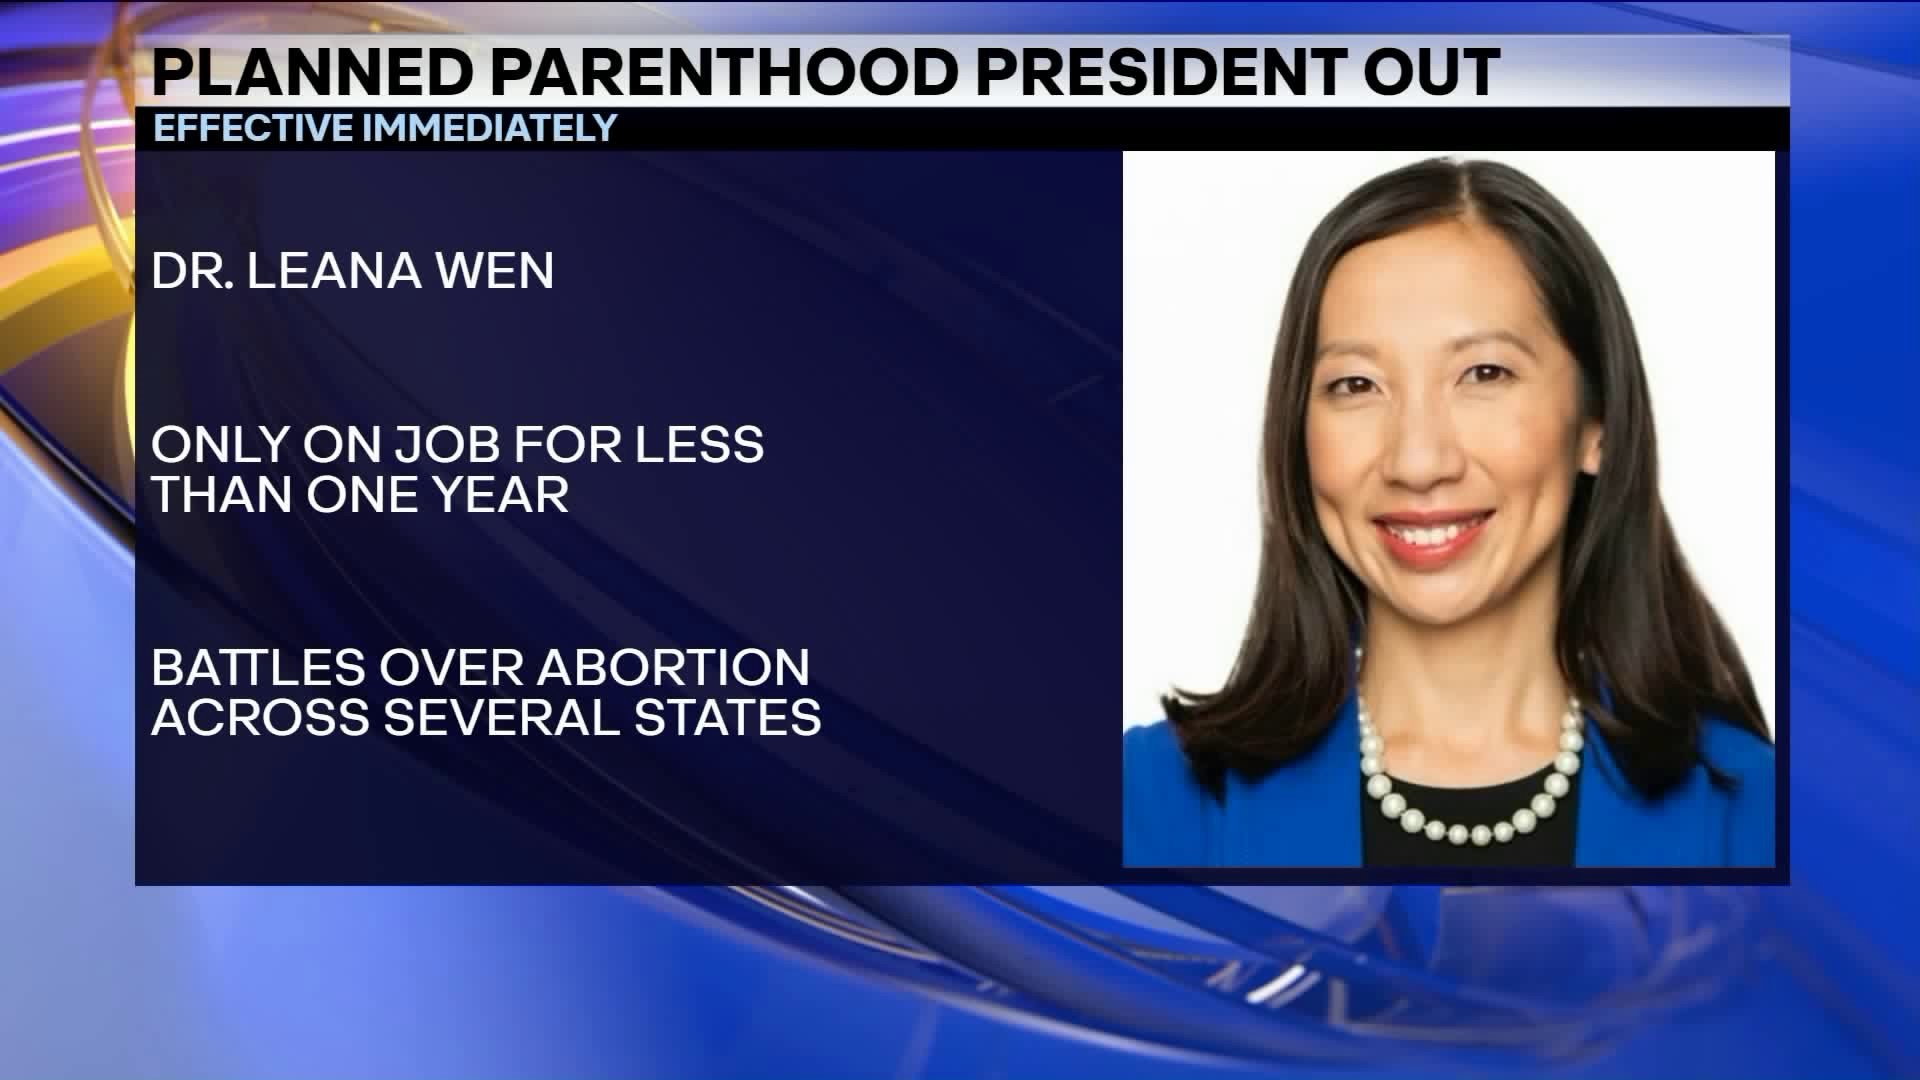 Planned Parenthood President Out